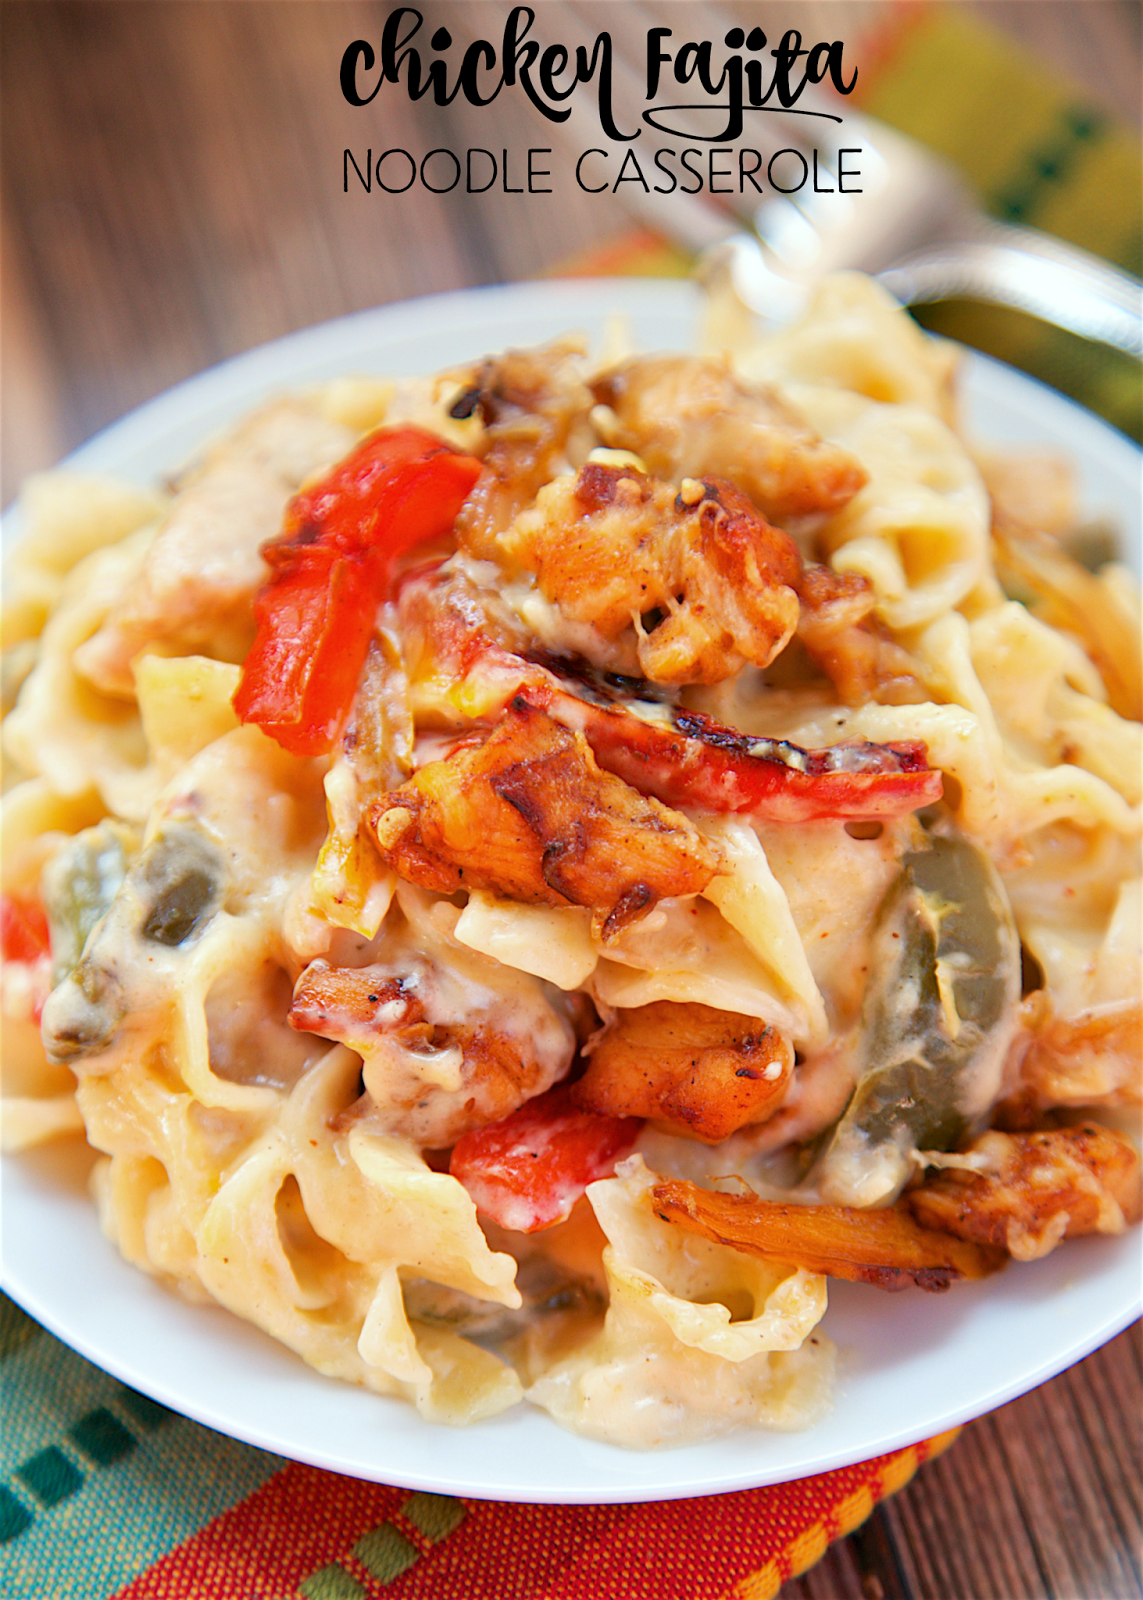 Chicken Fajita Noodle Casserole - chicken, fajita seasoning, bell peppers, onions, noodles, sour cream, cream of chicken soup and cheese. Seriously delicious! Can make ahead of time and refrigerate or freeze for later. Makes a lot - can split between 2 pans and freeze one for later. Everyone loves this casserole!